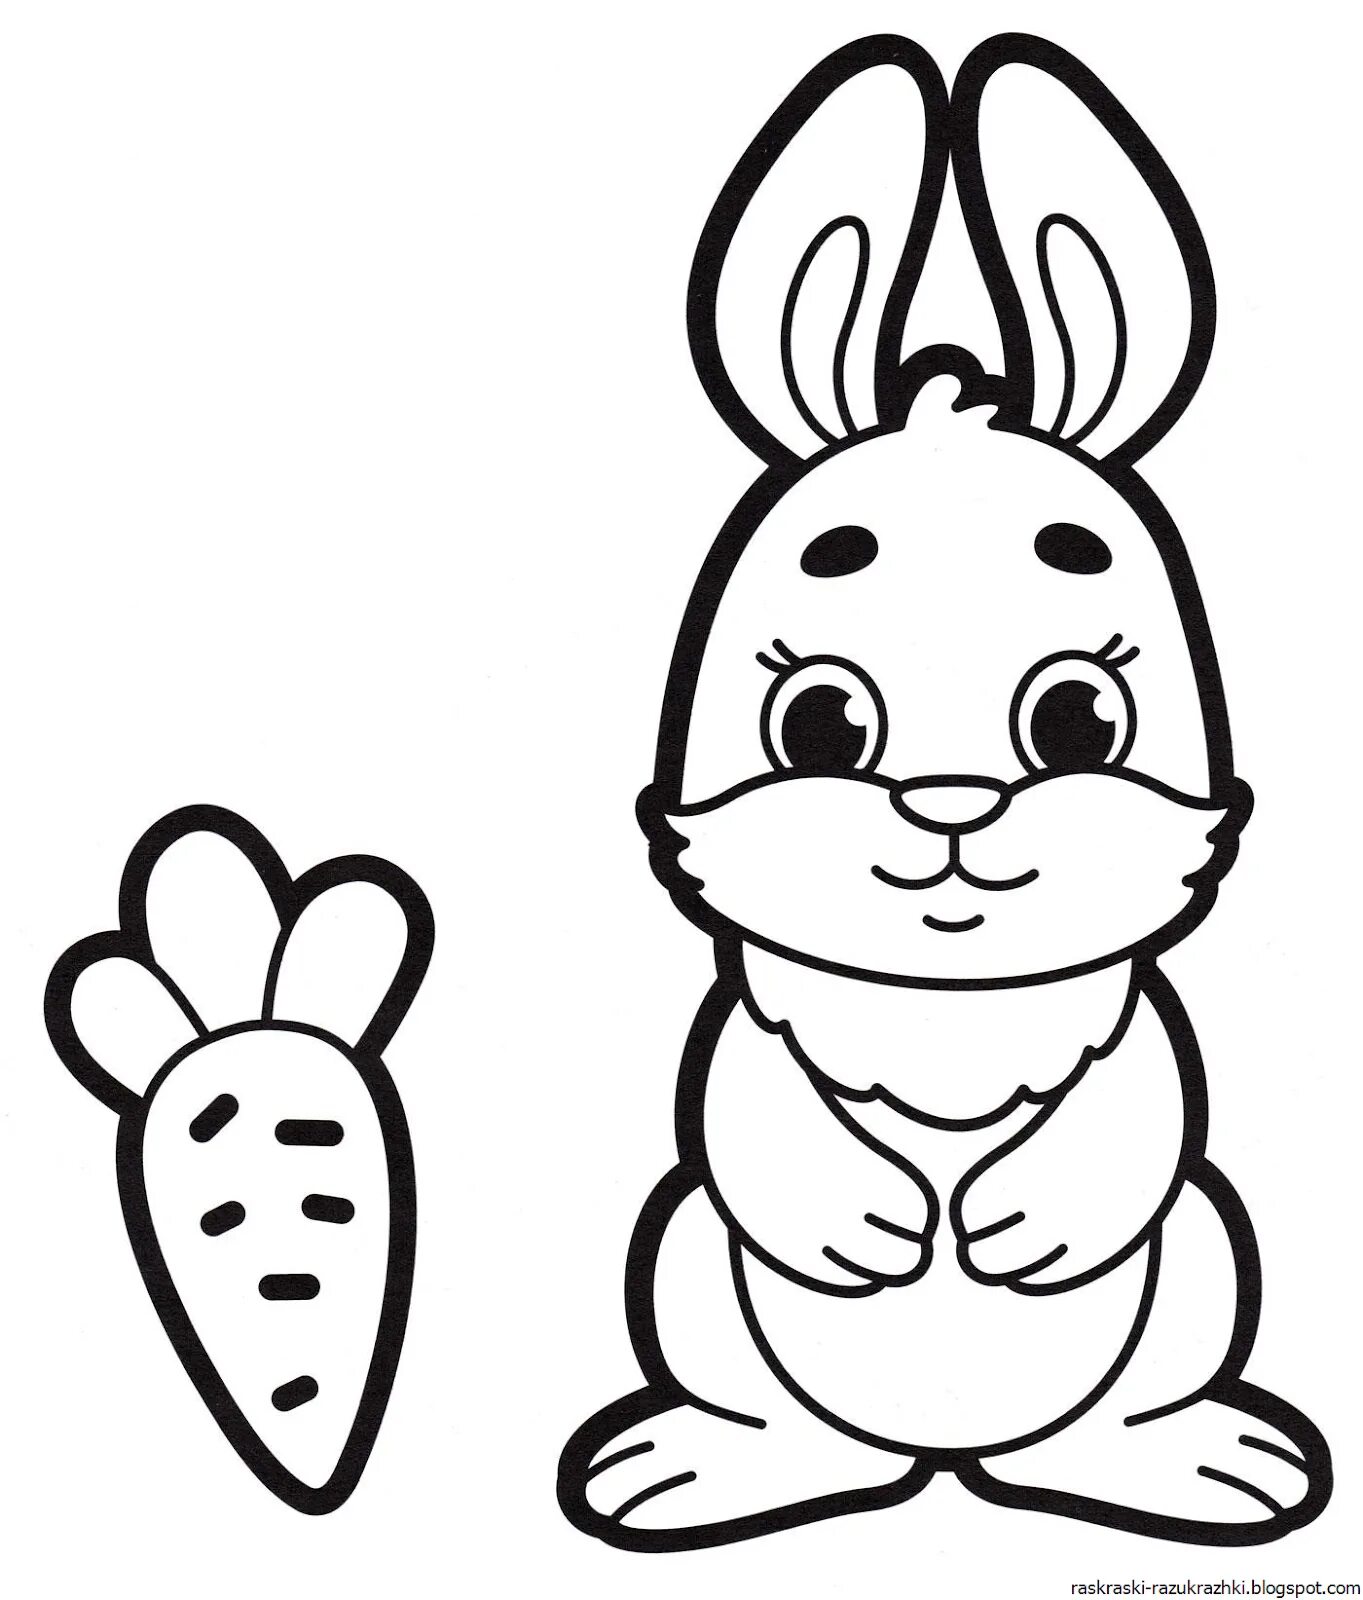 Perfect Bunny coloring book for 3 year olds